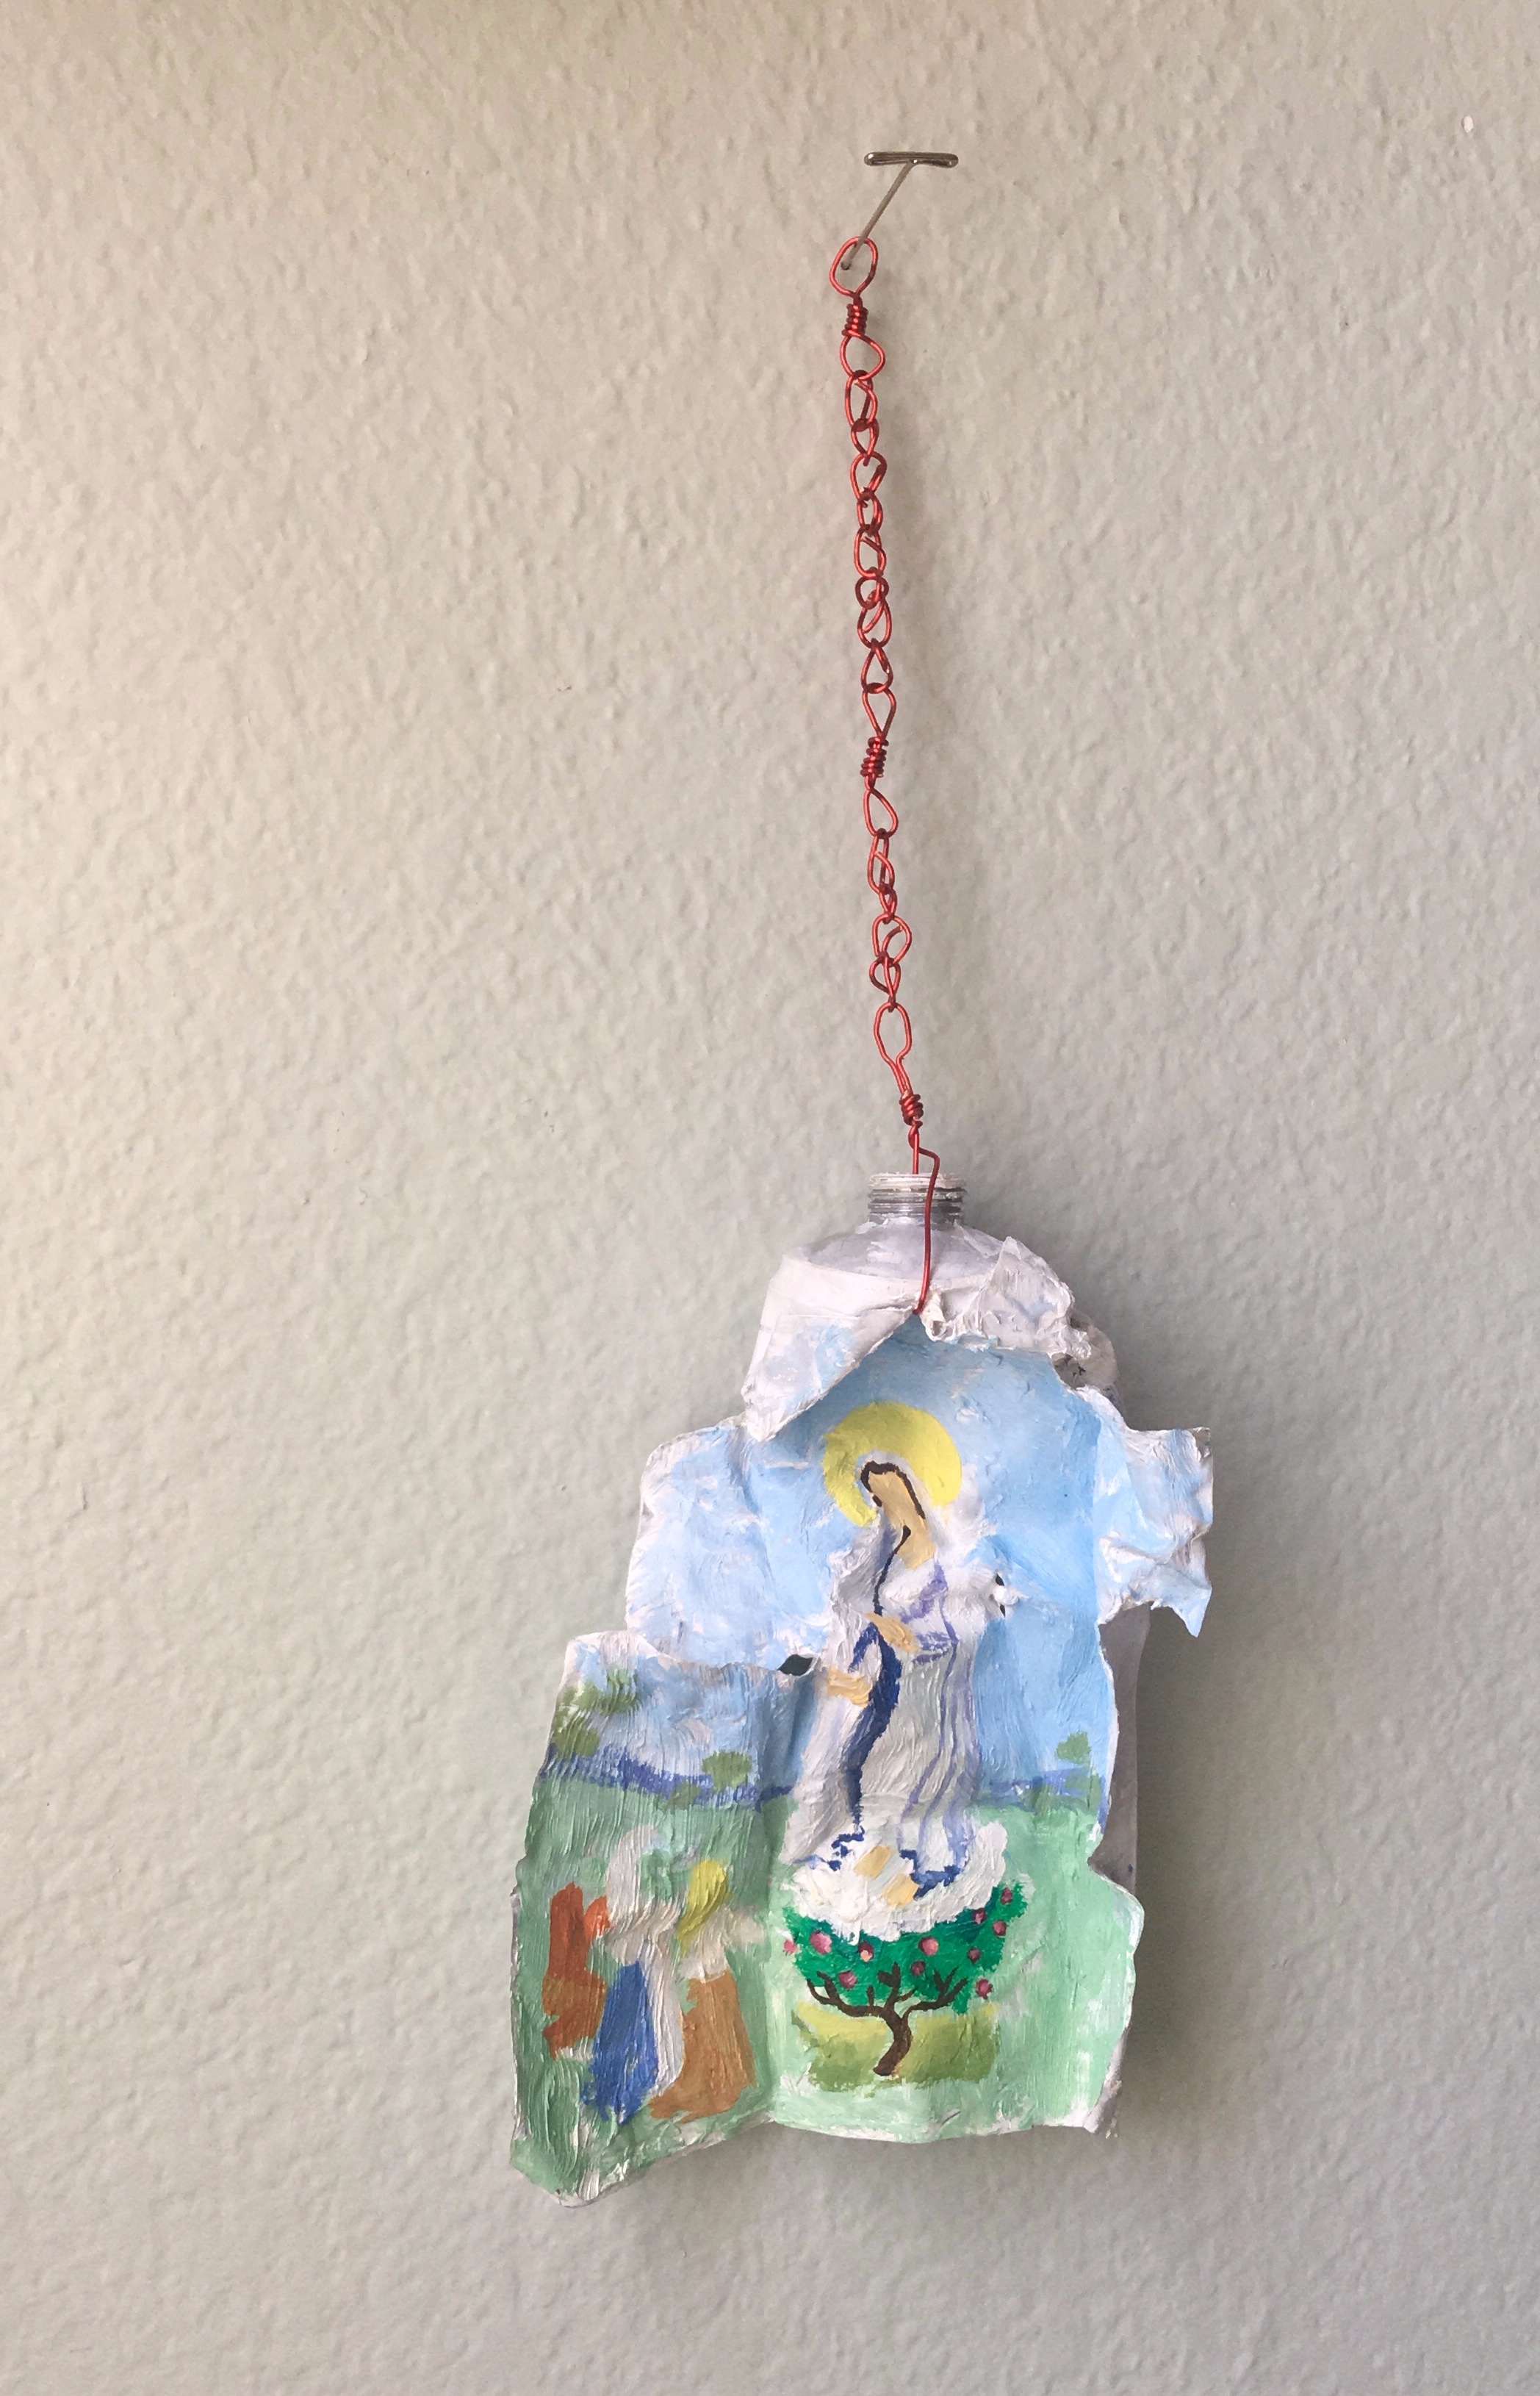   Apparition of Our Lady of Fatima Within a Paint Vessel   oil on paint tube, artist made chain  2018 - 2019   